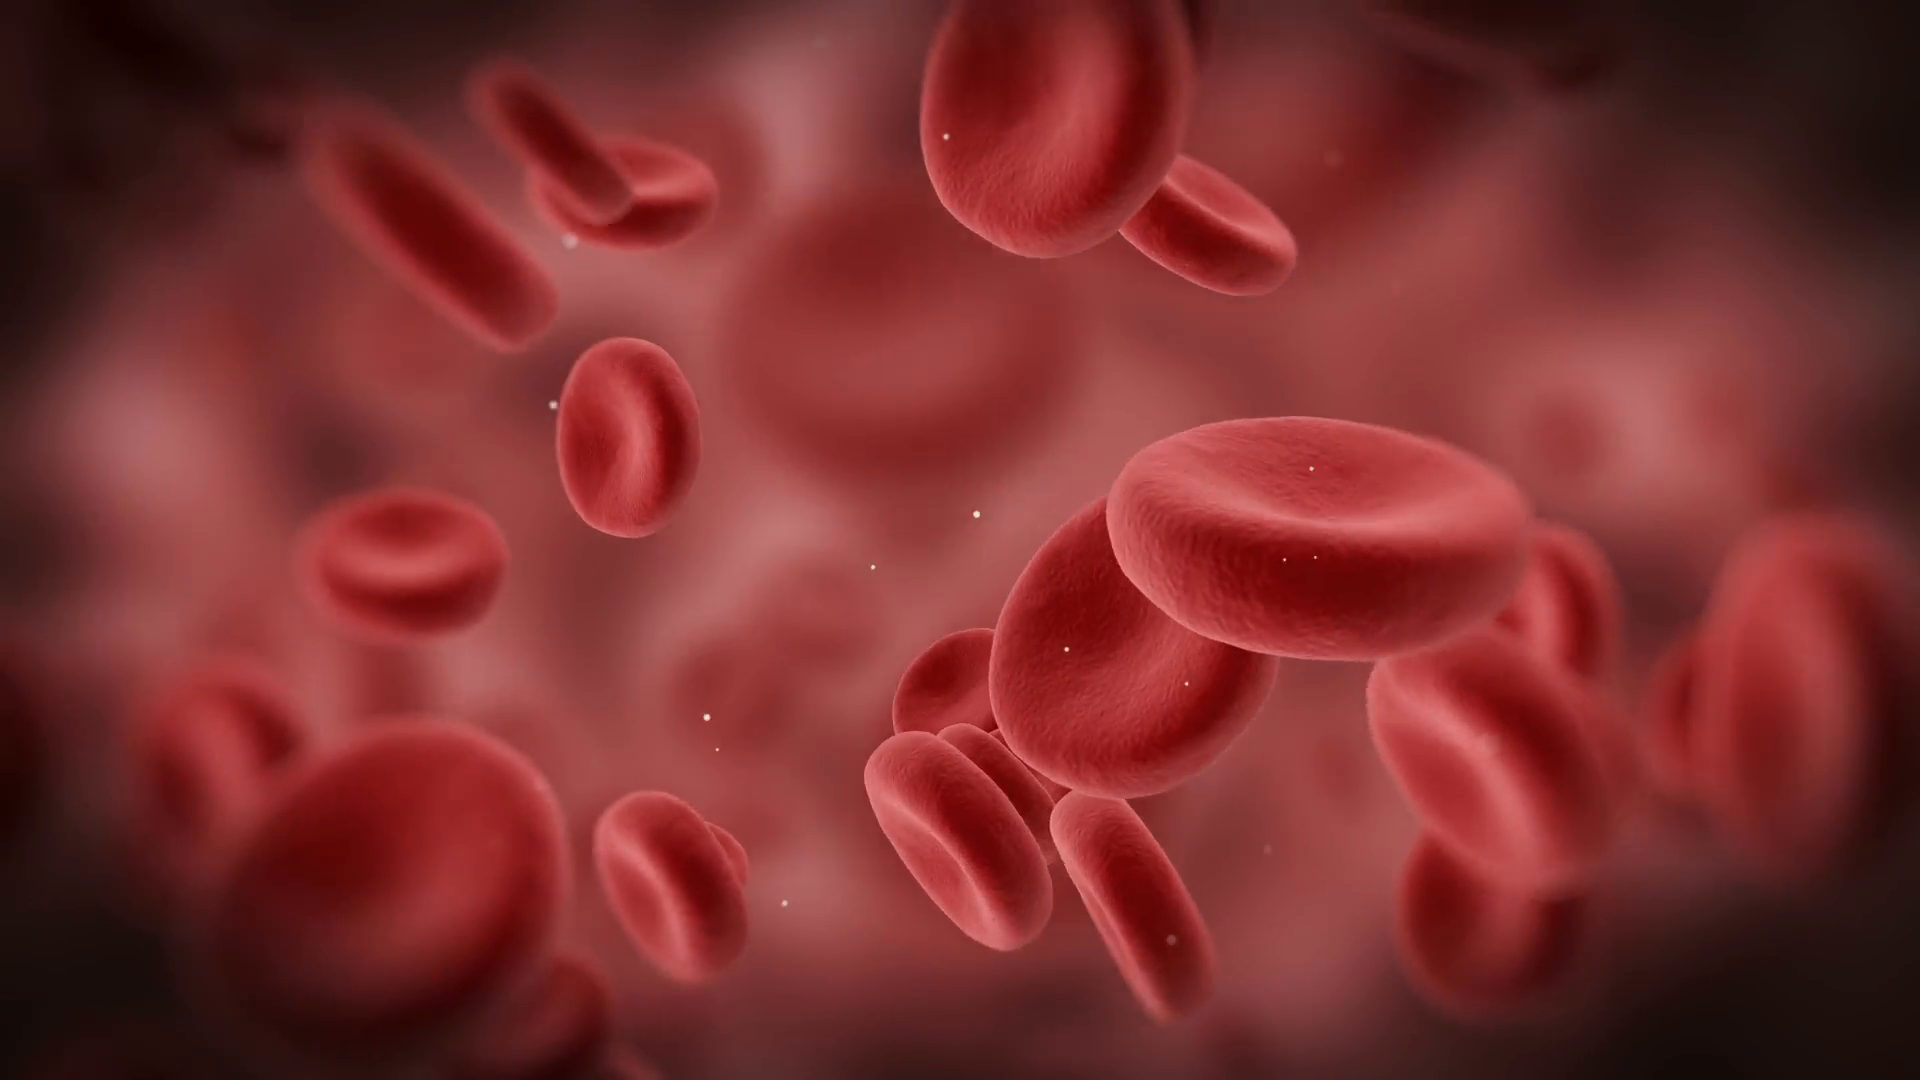 Animation of Red Blood Cells Flowing Through Vein. HQ Video Clip ...